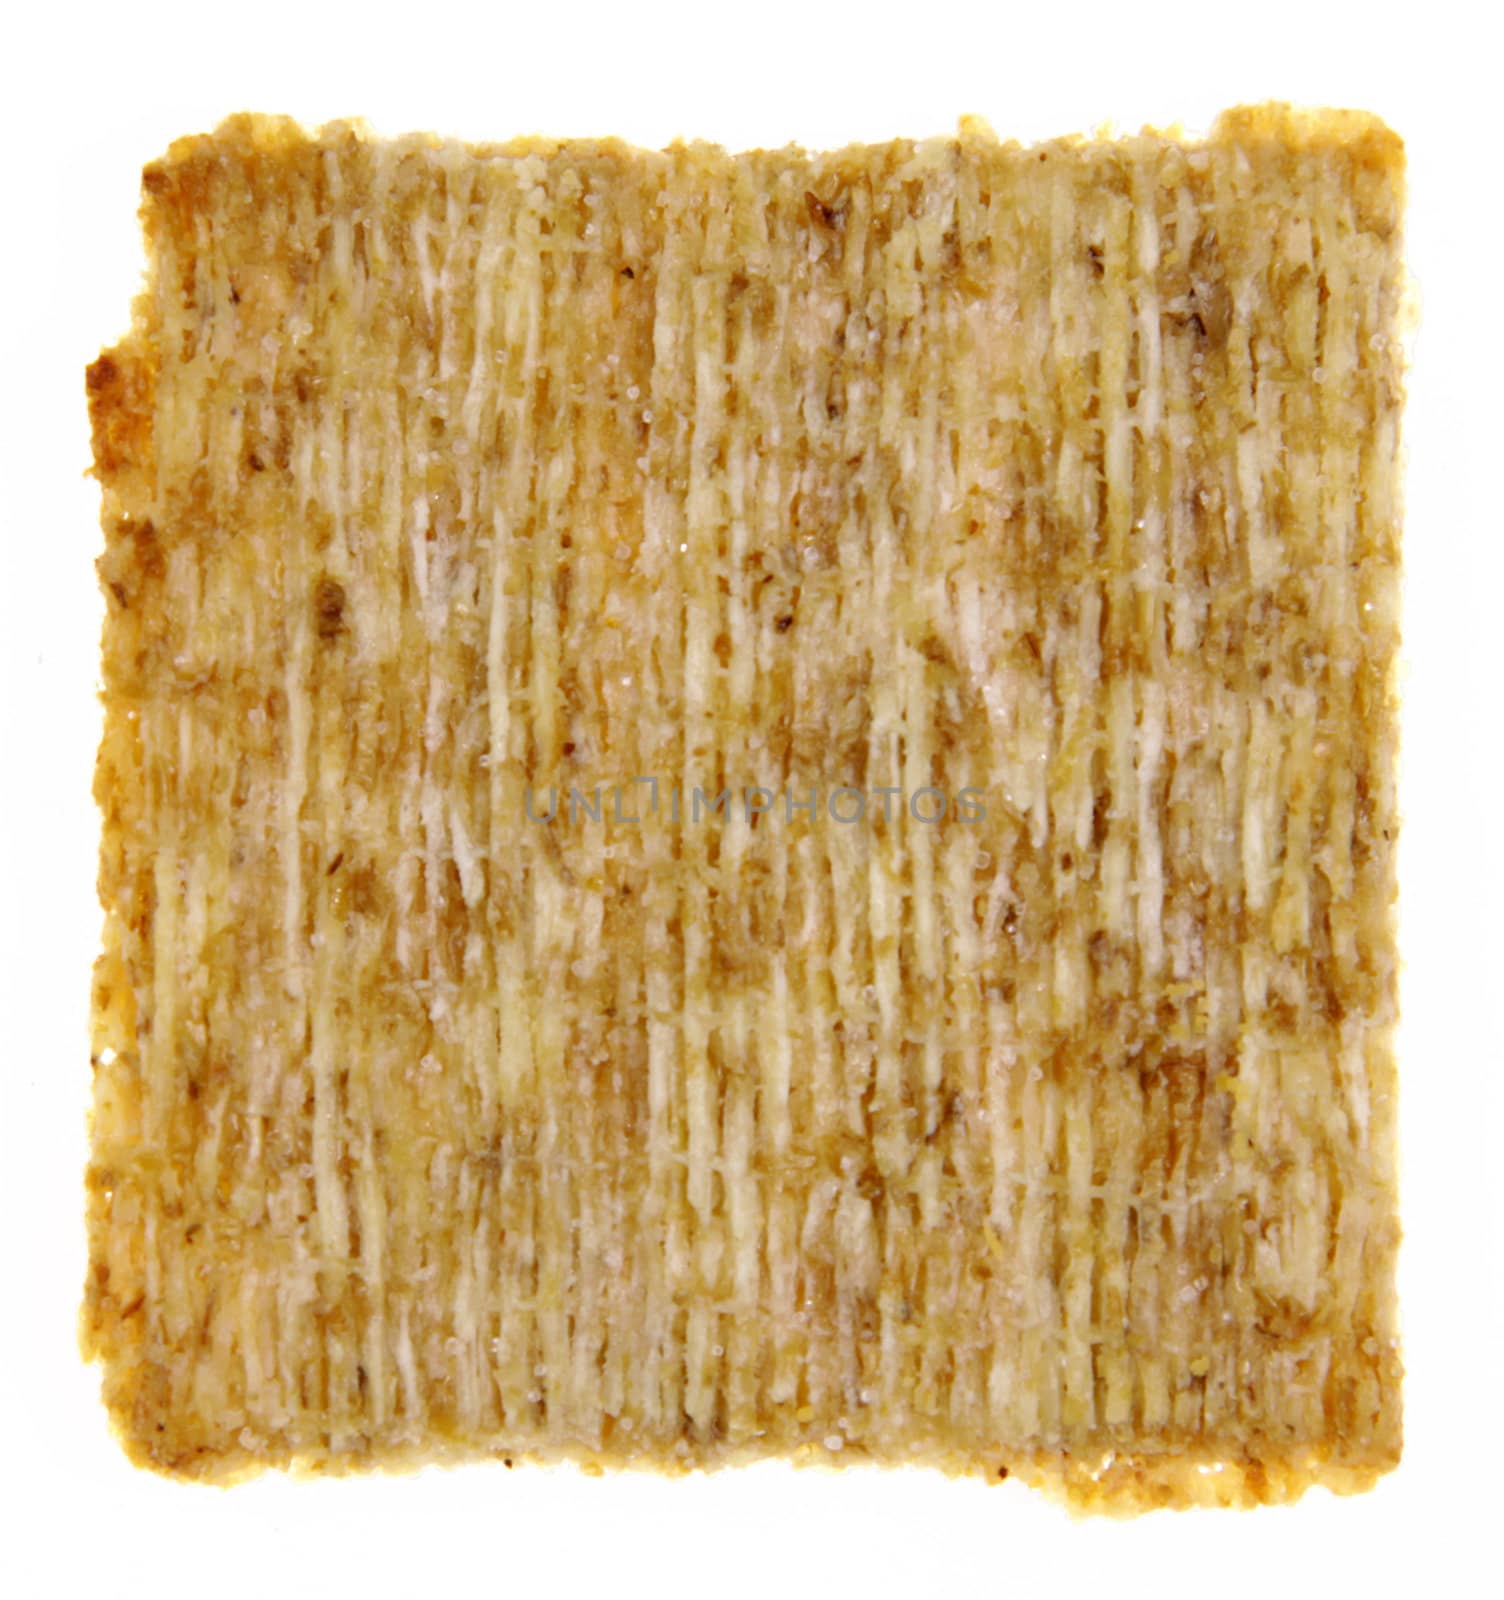 Isolated Wheat Cracker
 by ca2hill